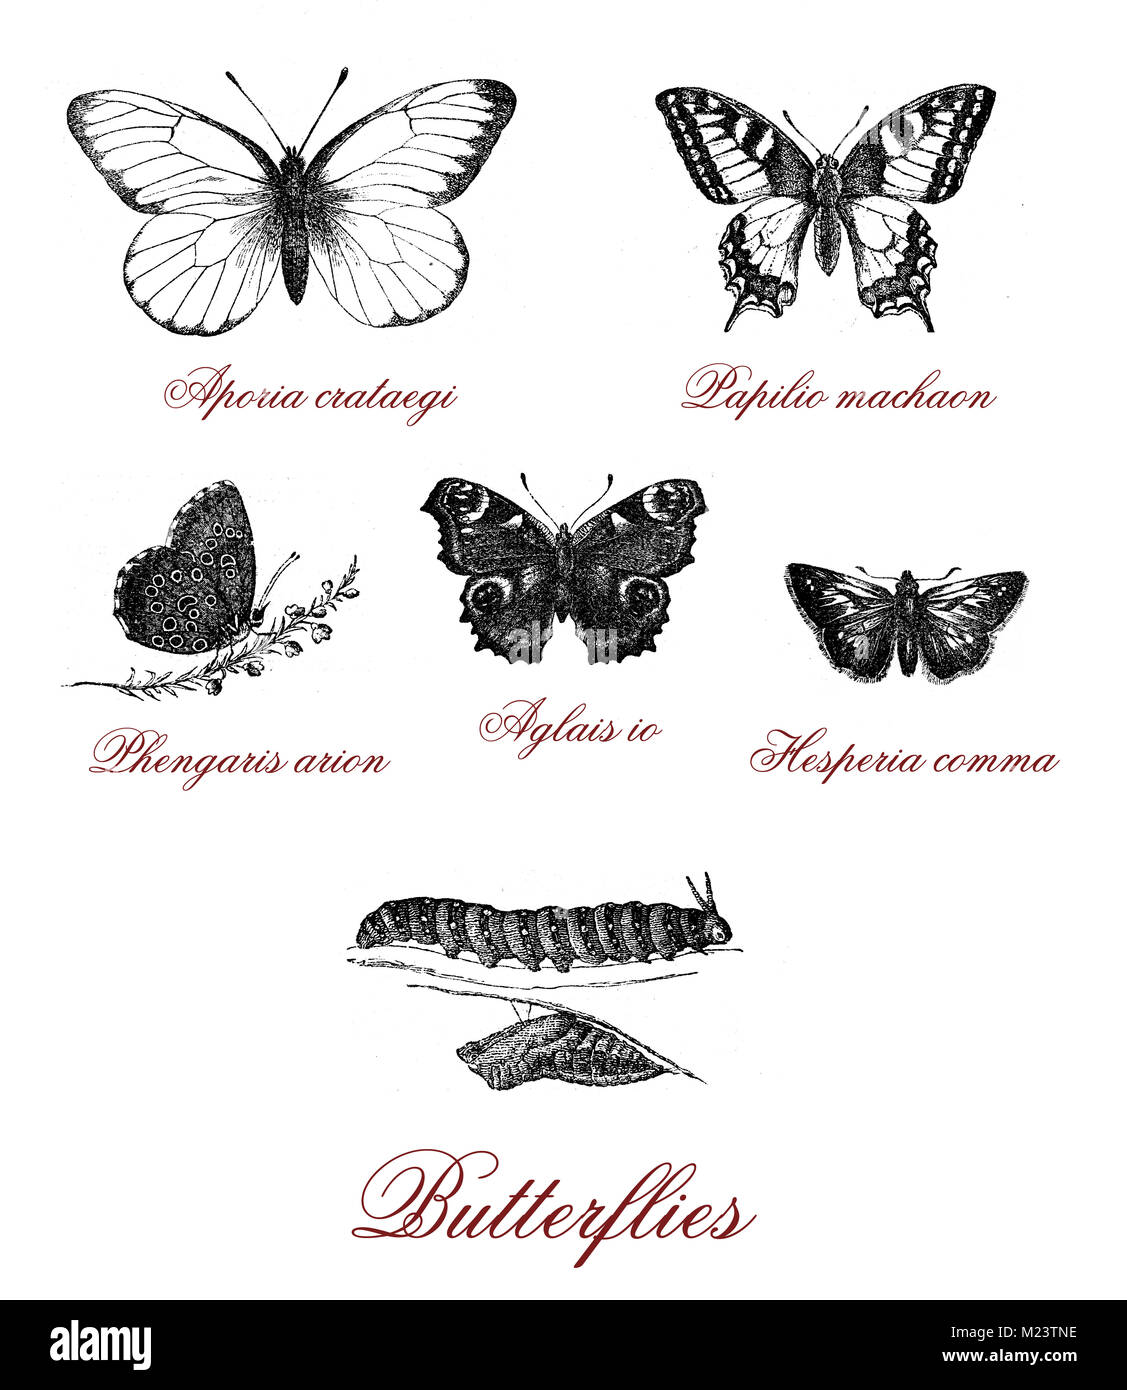 Different kind of butterfly and butterfly metamorphosis, vintage illustration Stock Photo